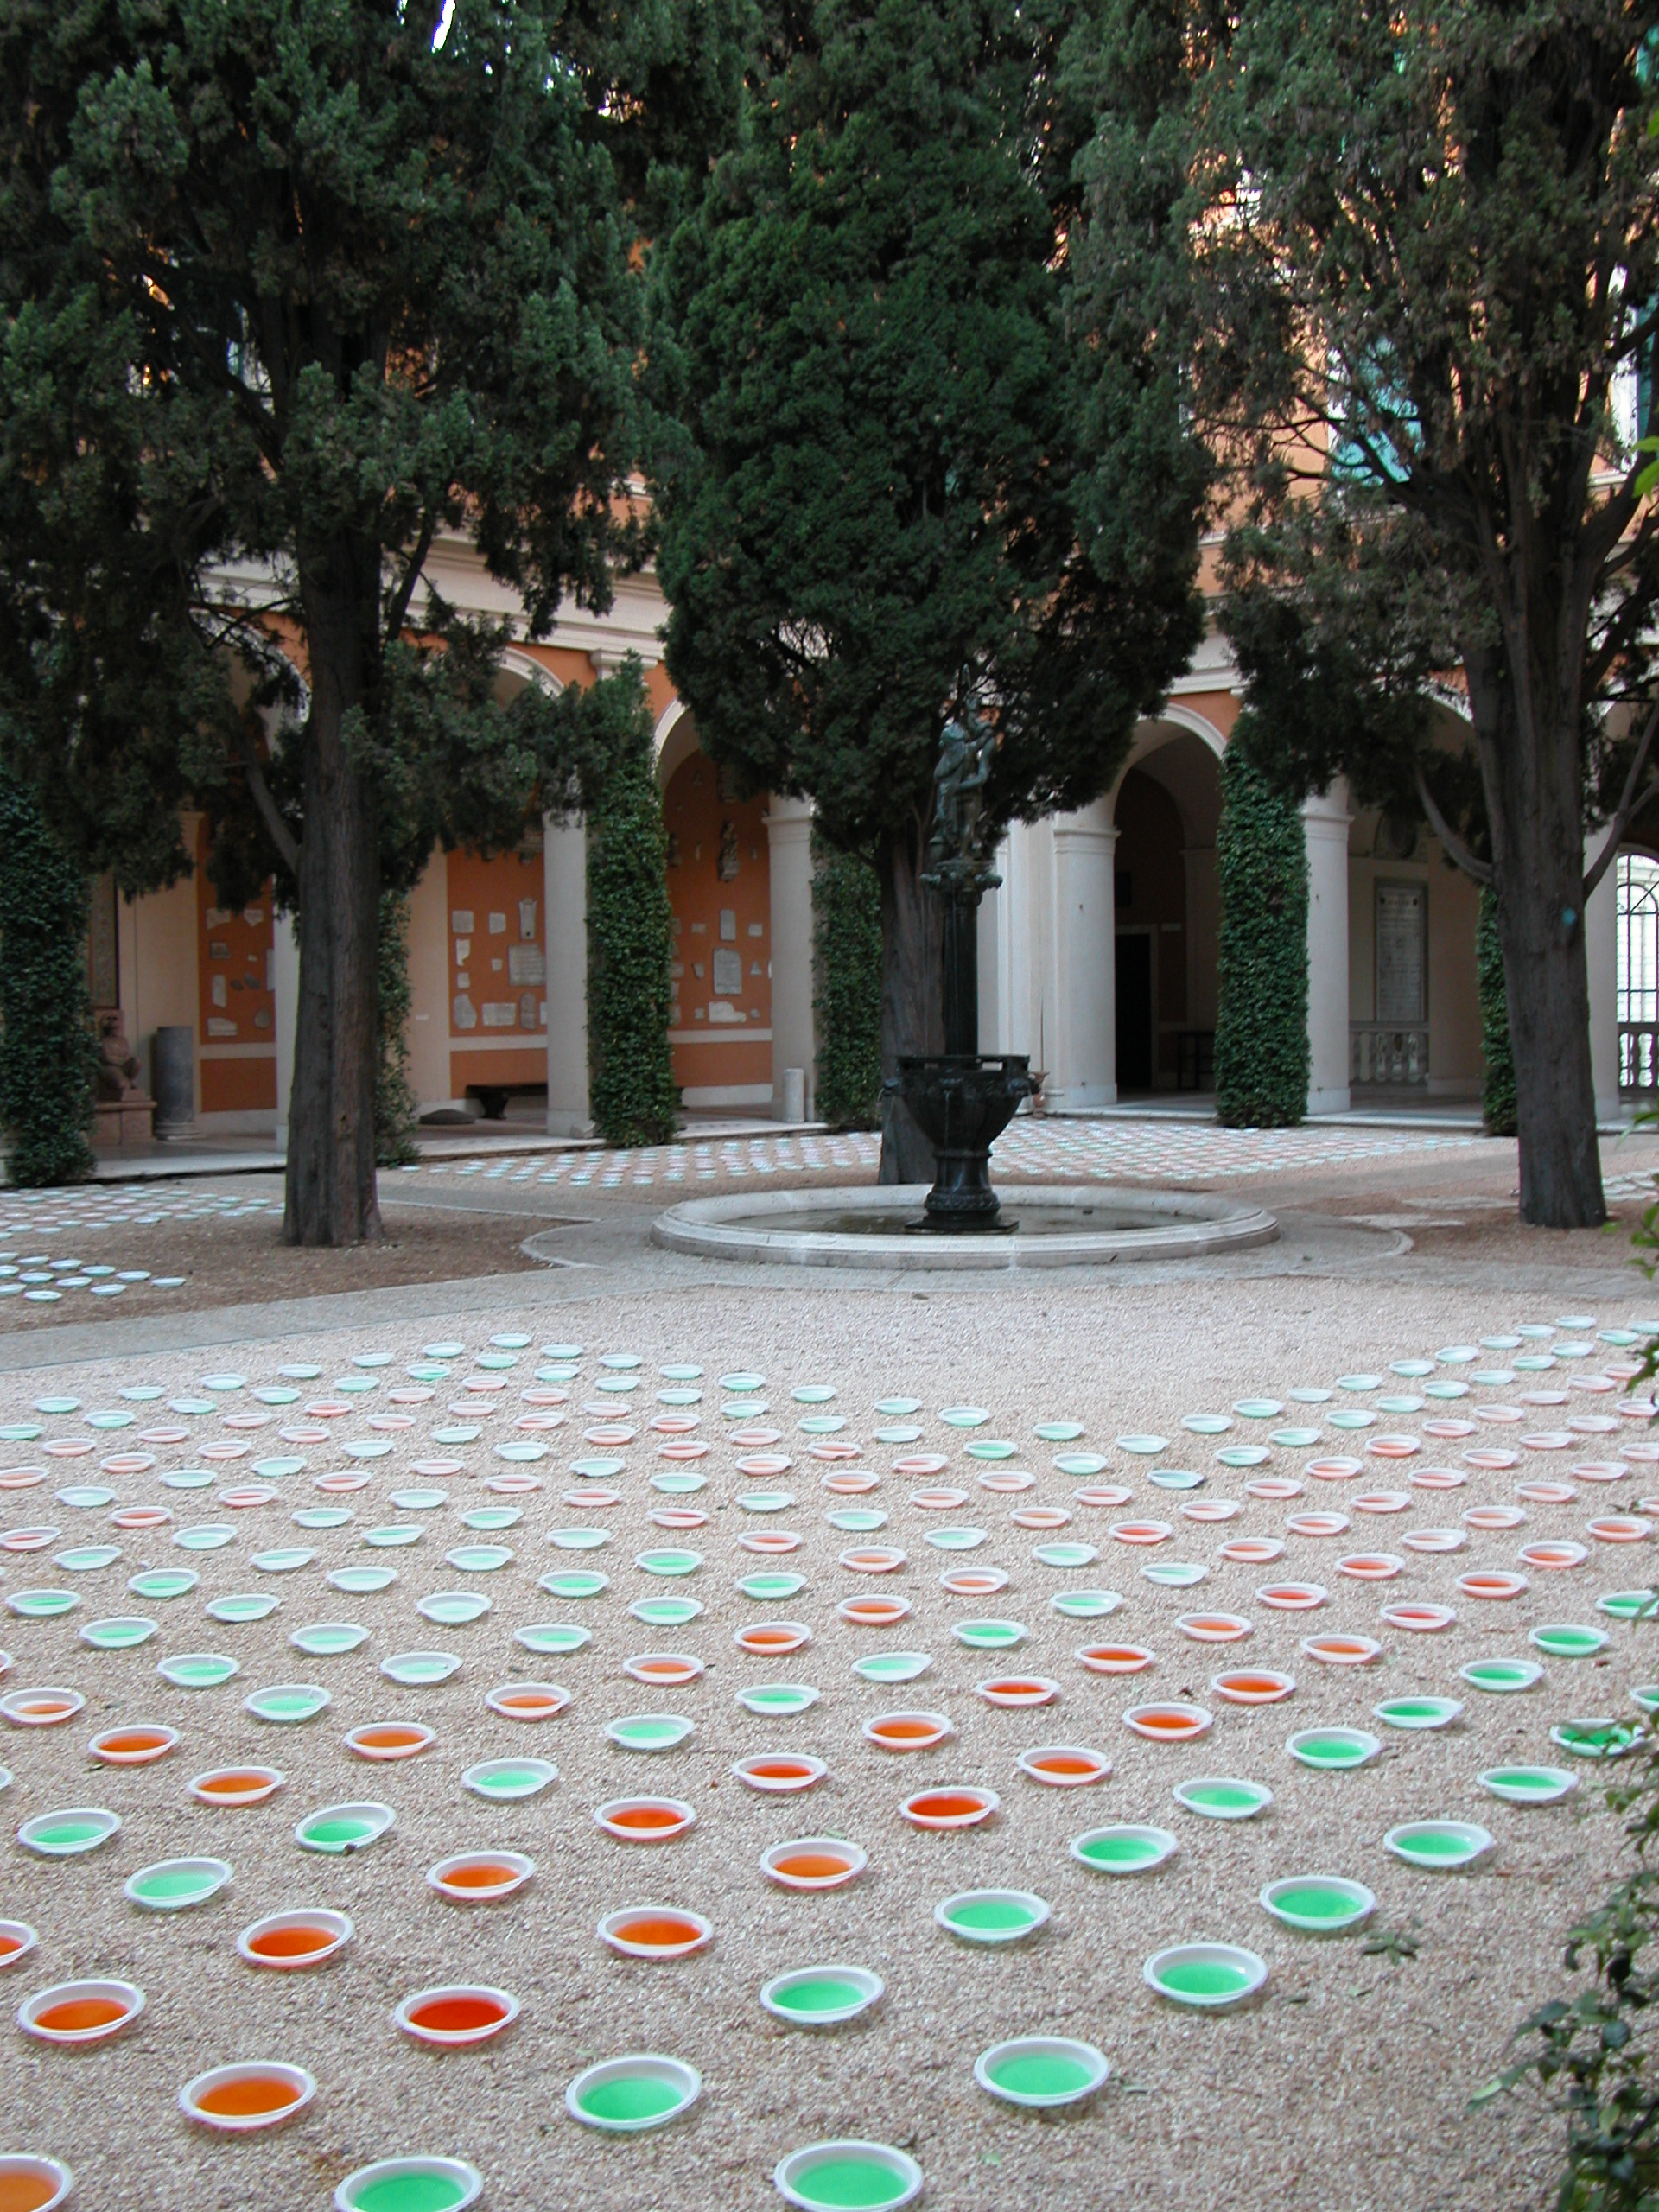   American Academy in Rome   Temporary Courtyard Installation 